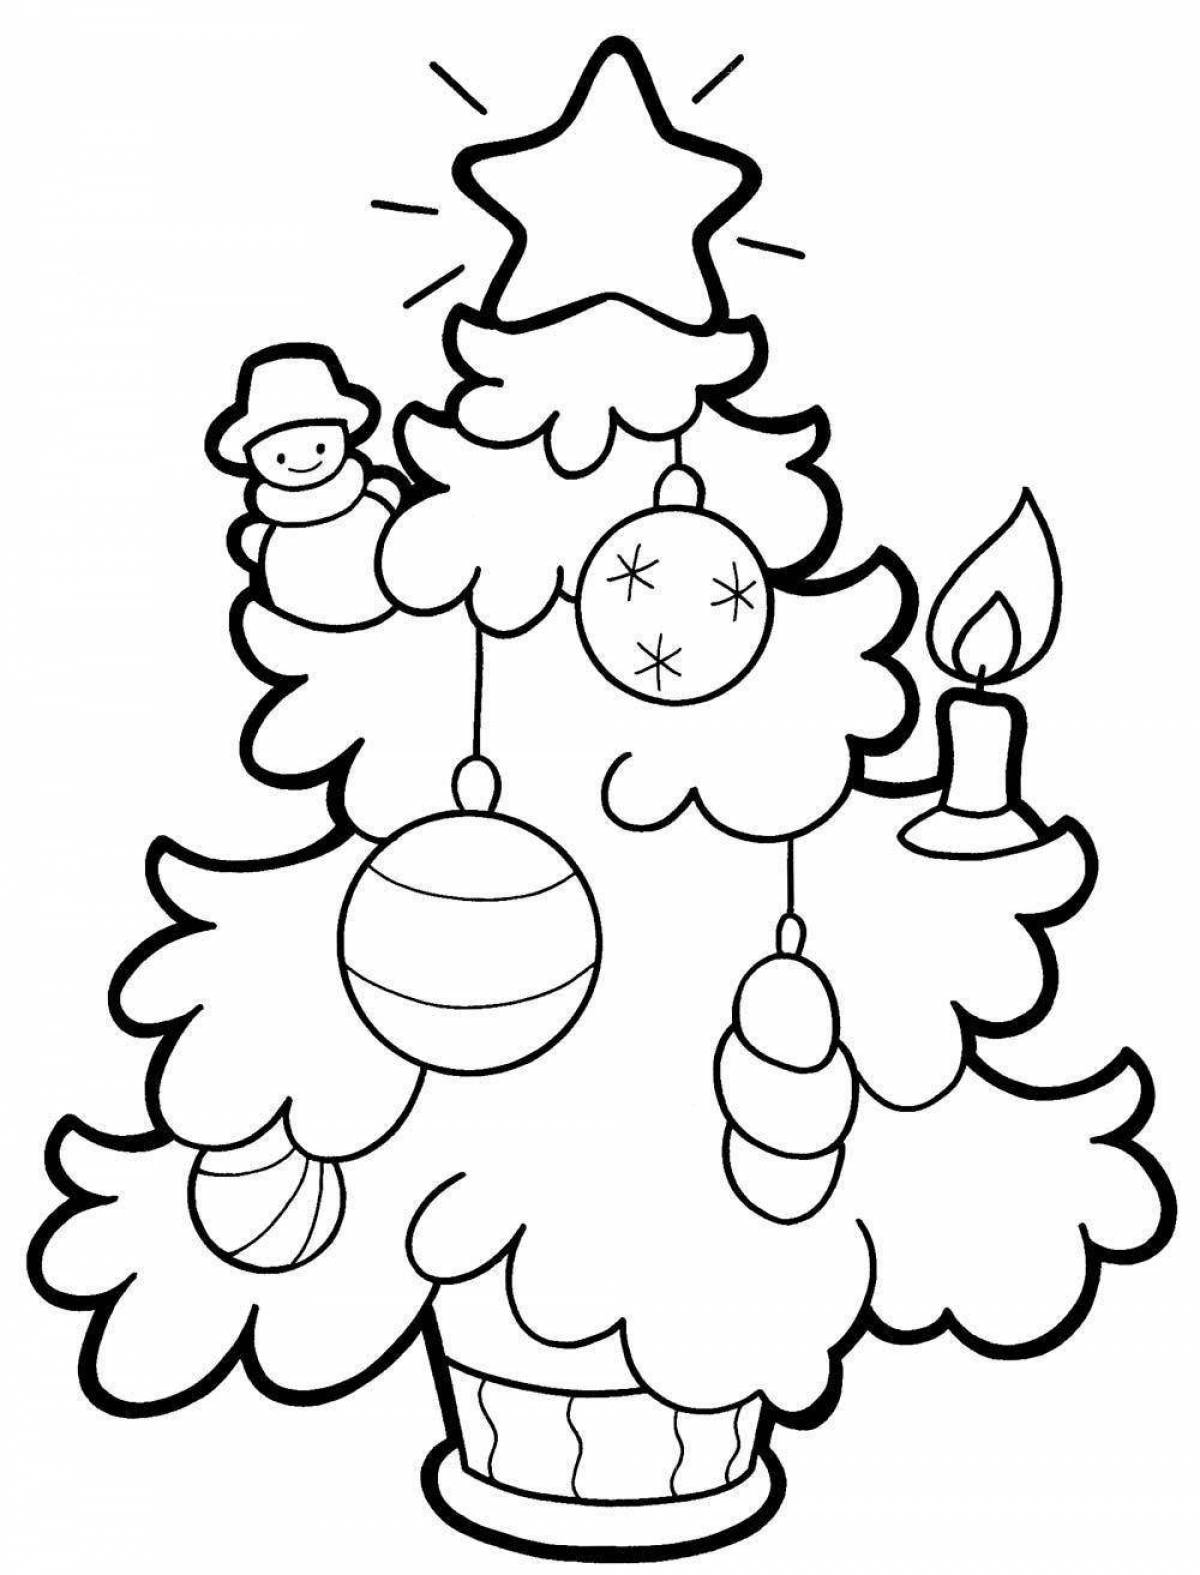 Magic little Christmas coloring book